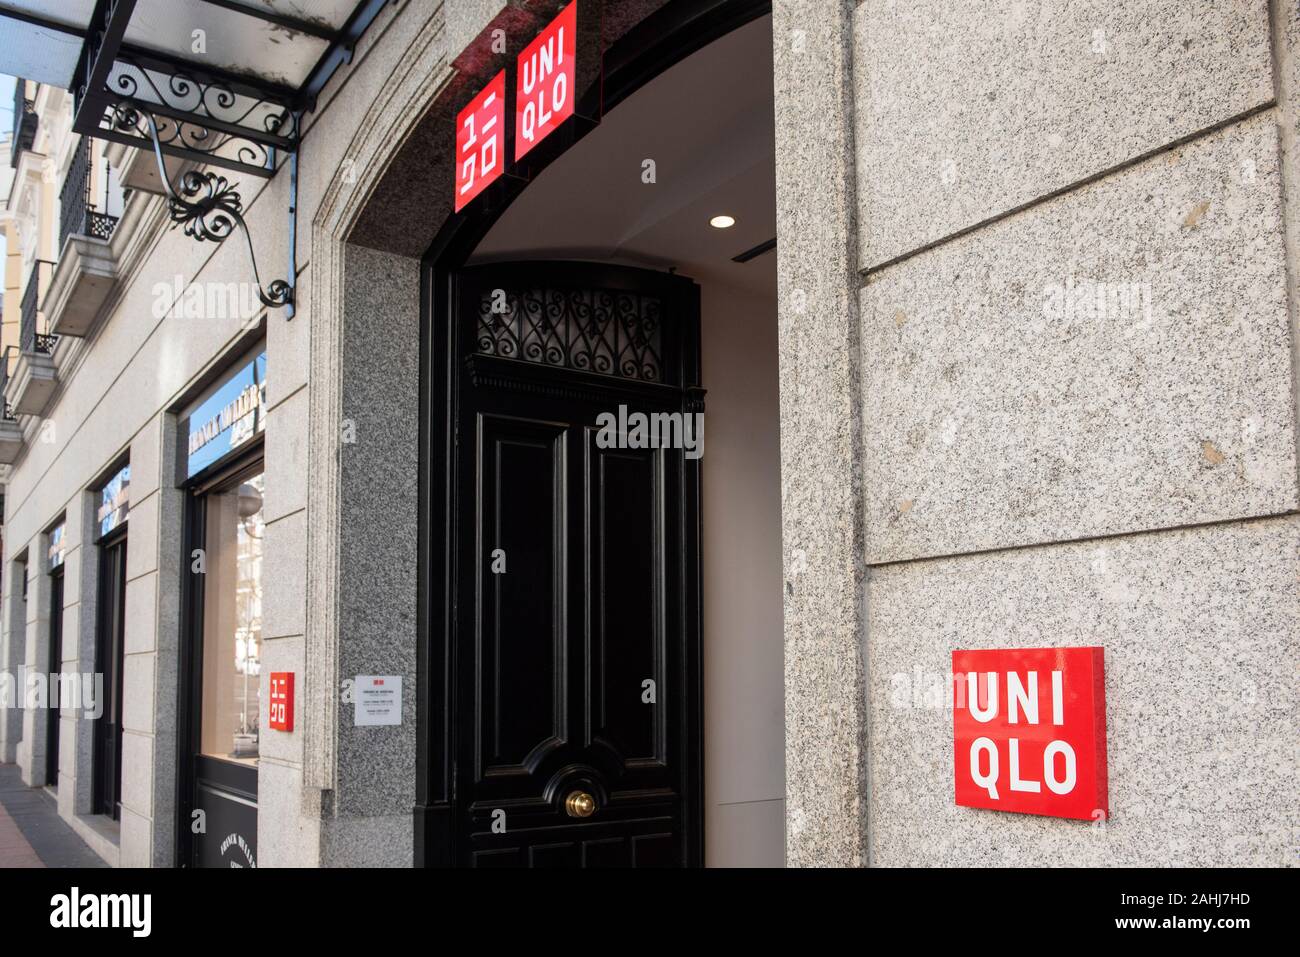 Japanese clothing brand Uniqlo logo and store in Madrid, Spain Stock Photo  - Alamy